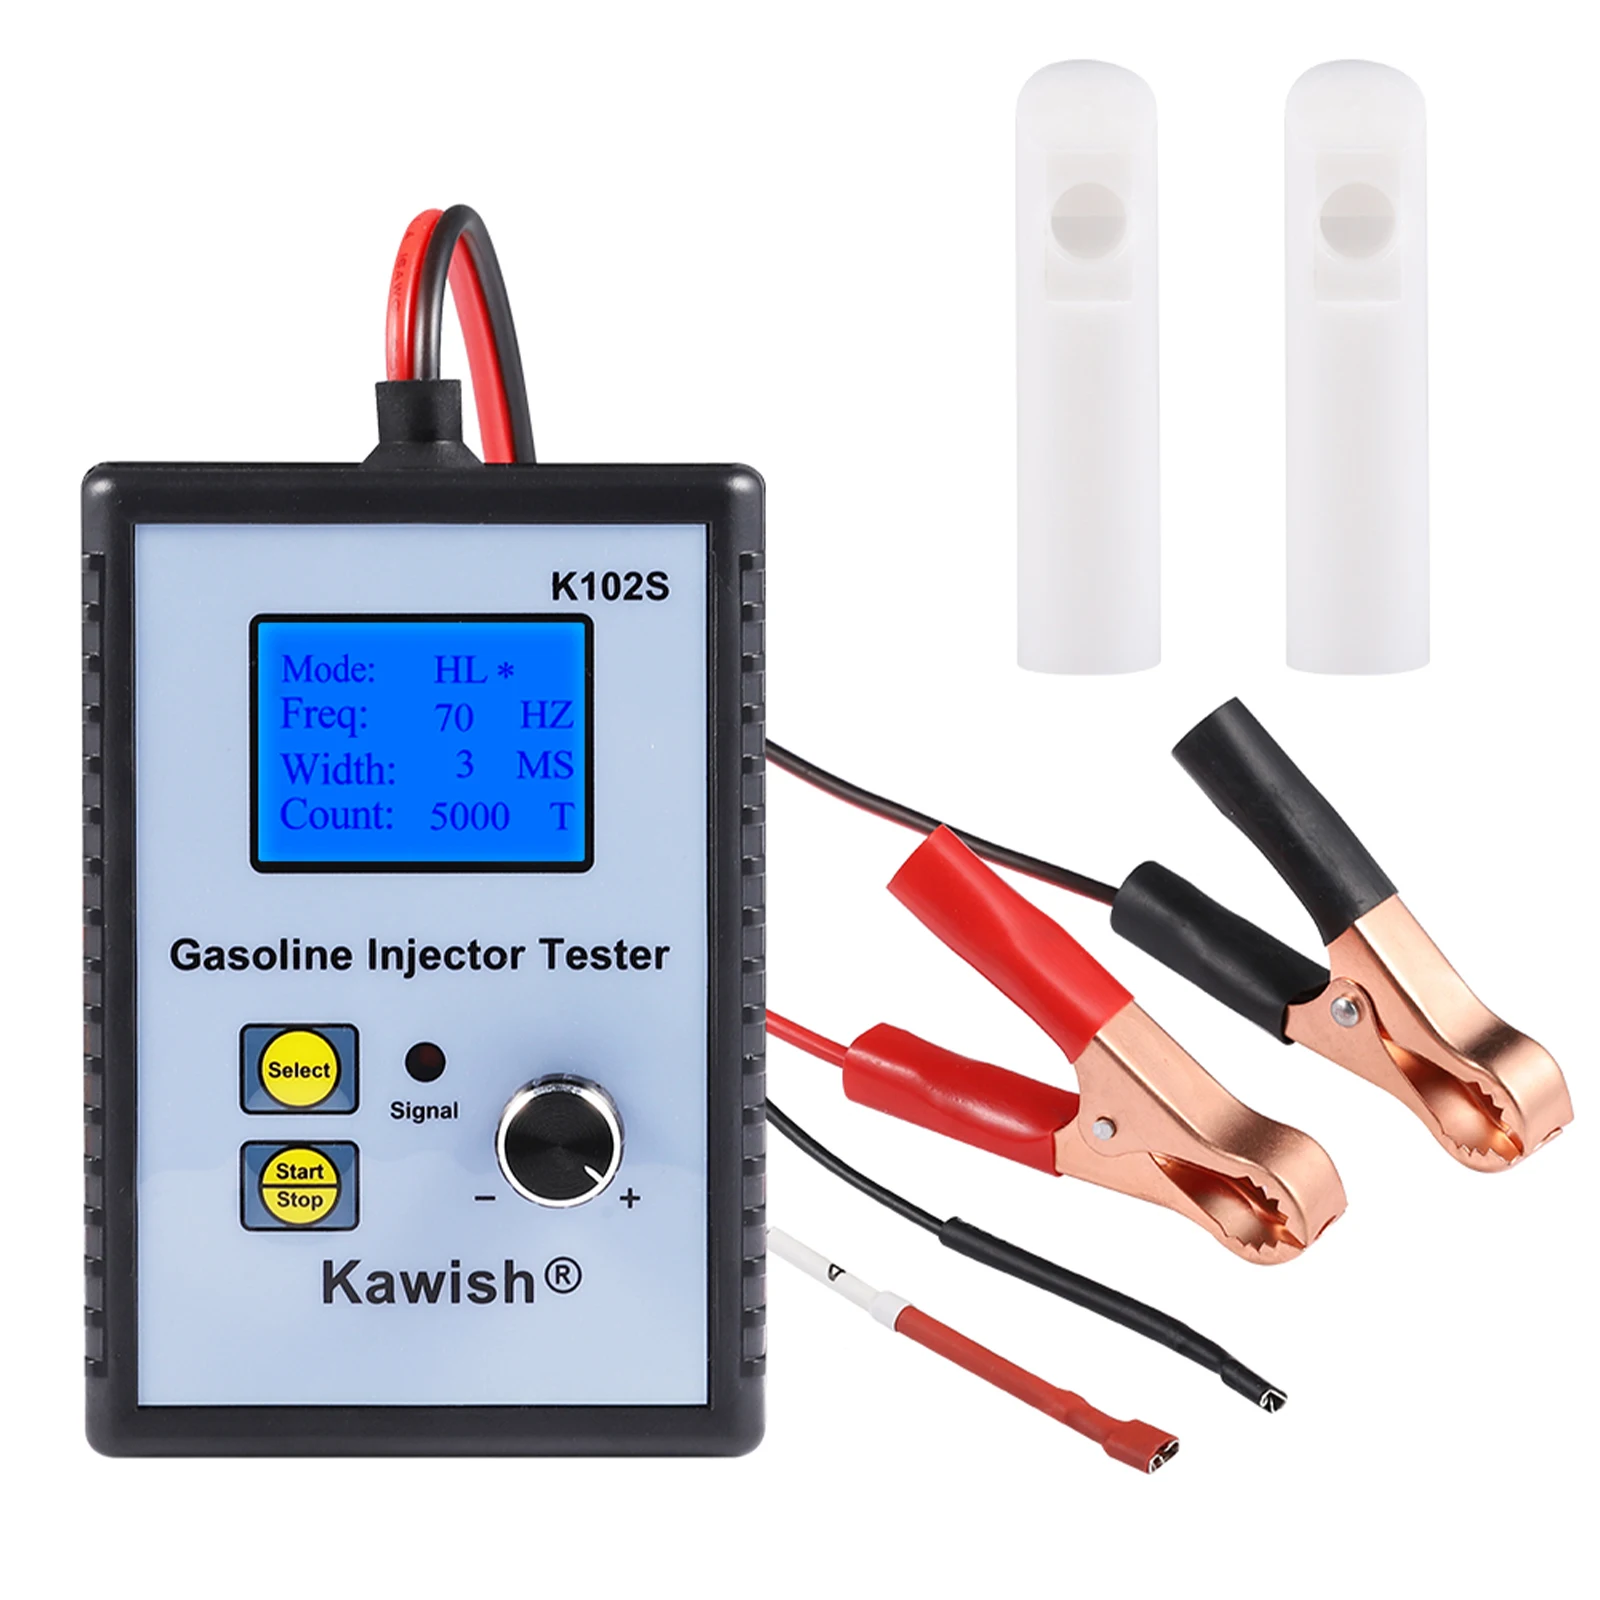 

12V EU Professional Injector Tester Fuel System Scan Tool Gasoline Injector Tester Motorcycle Fuel Injector Tester